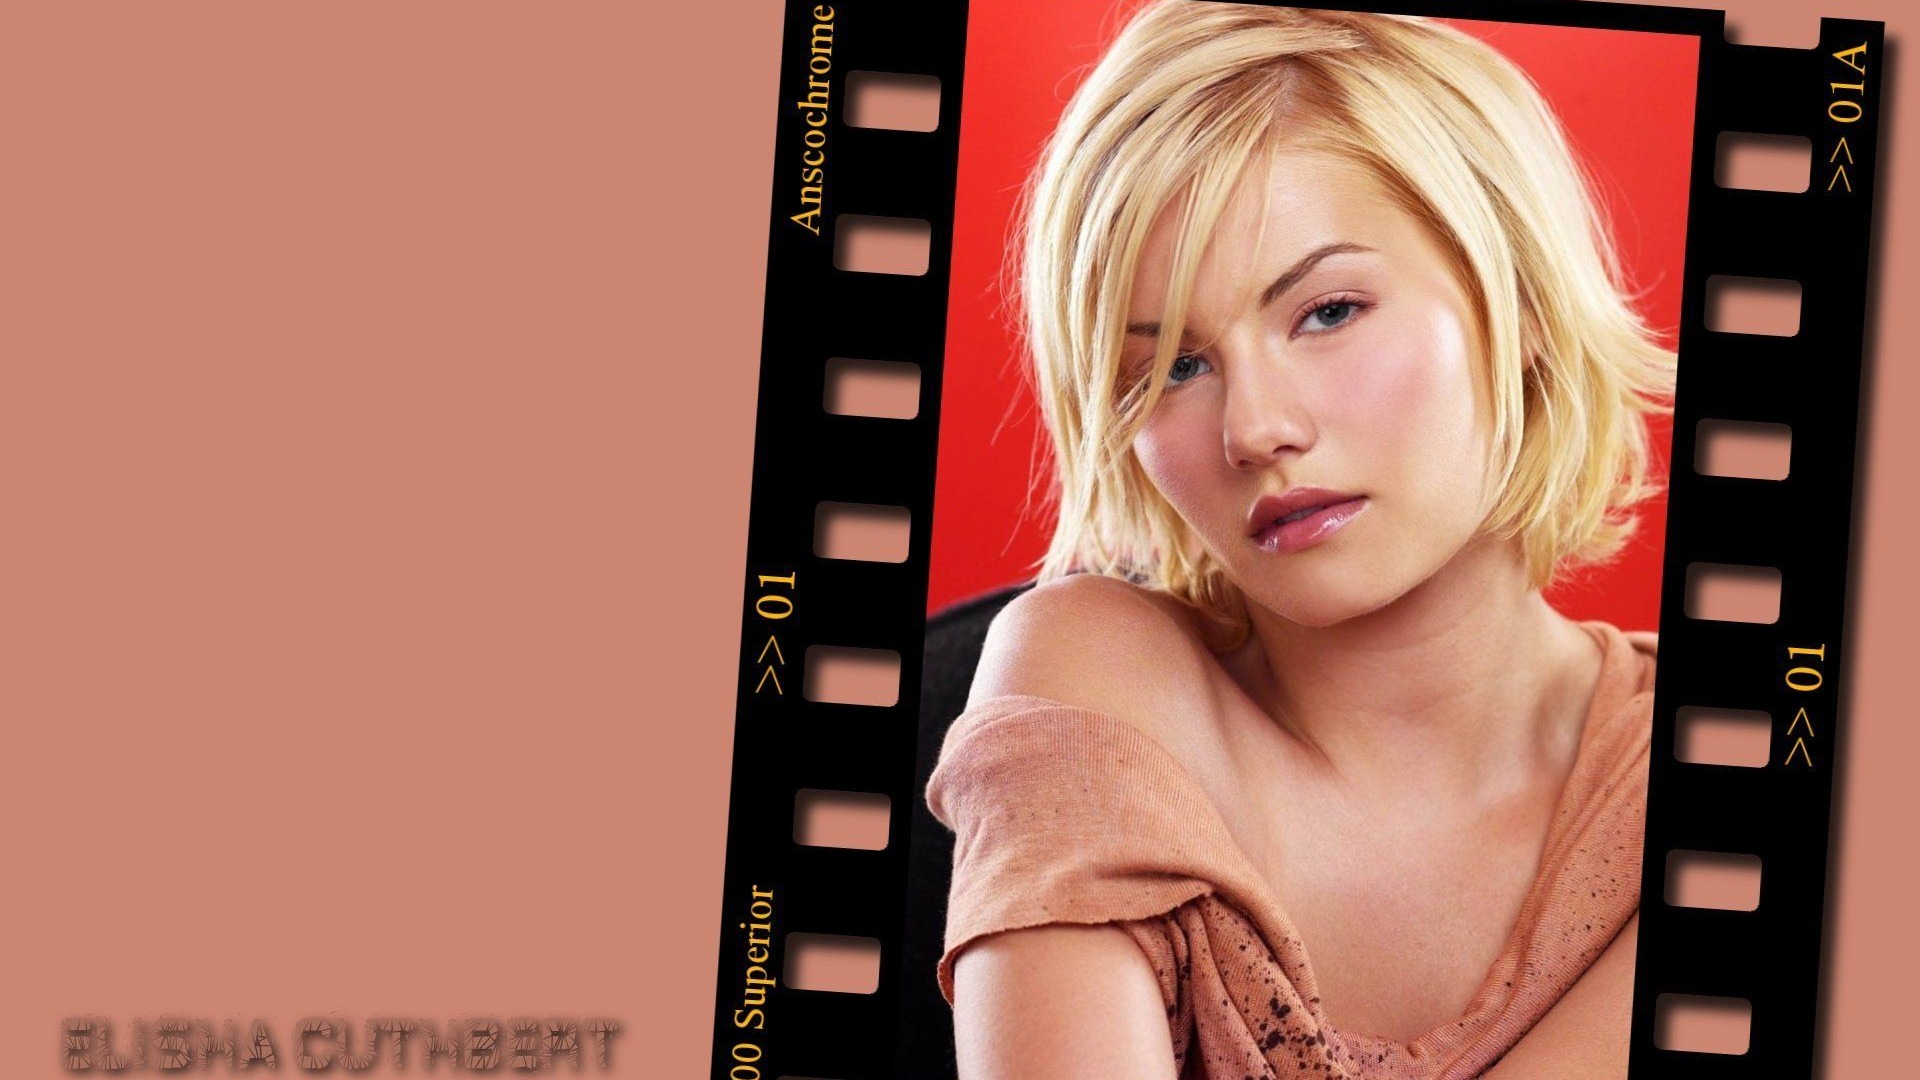 Elisha Cuthbert #015 - 1920x1080 Wallpapers Pictures Photos Images